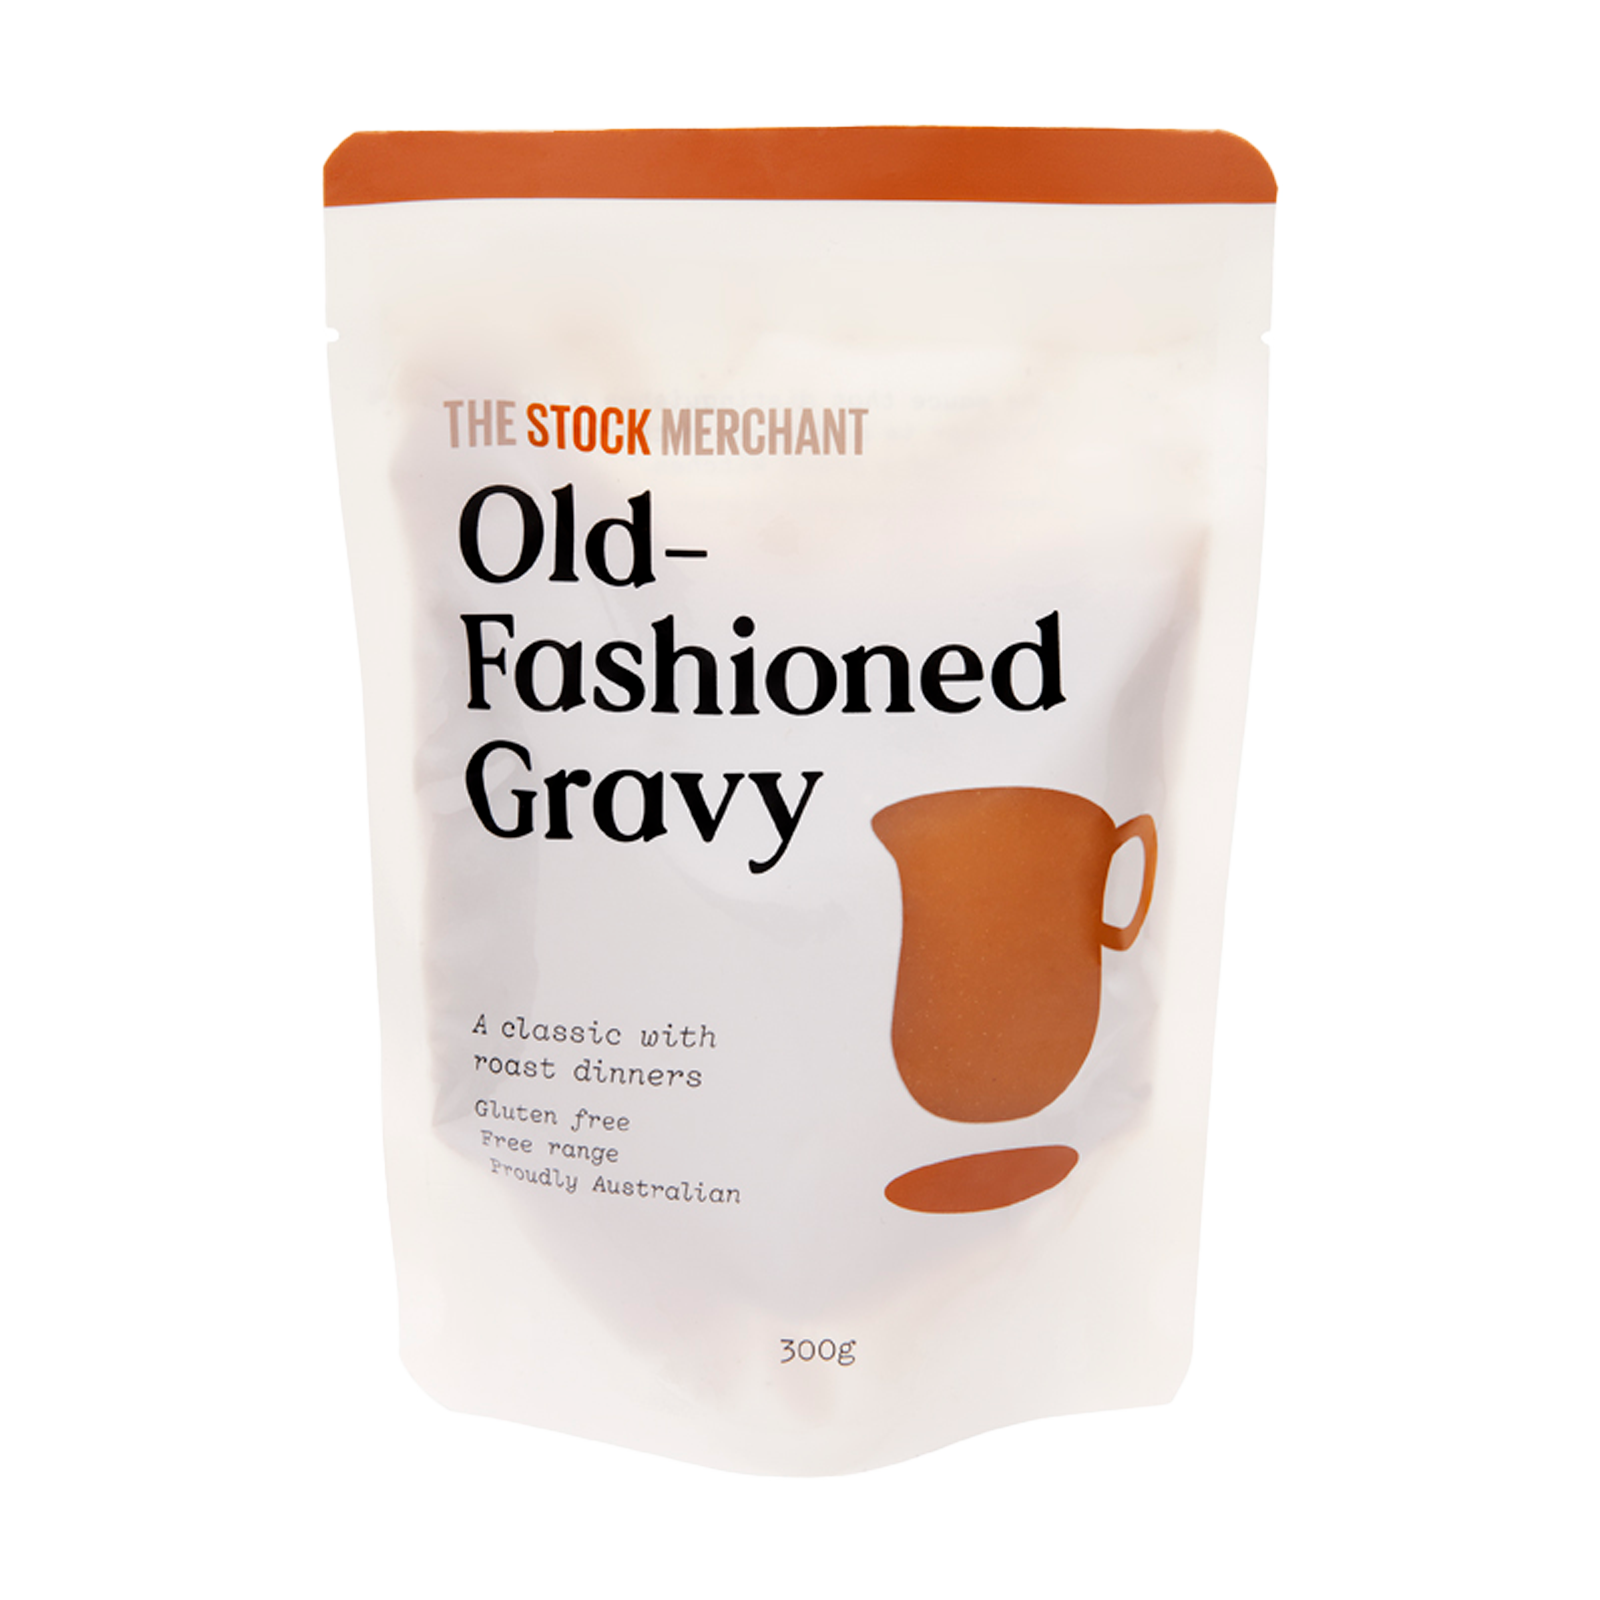 All-Natural Old-Fashioned Gravy Sauce from Australia (300g) - Horizon Farms